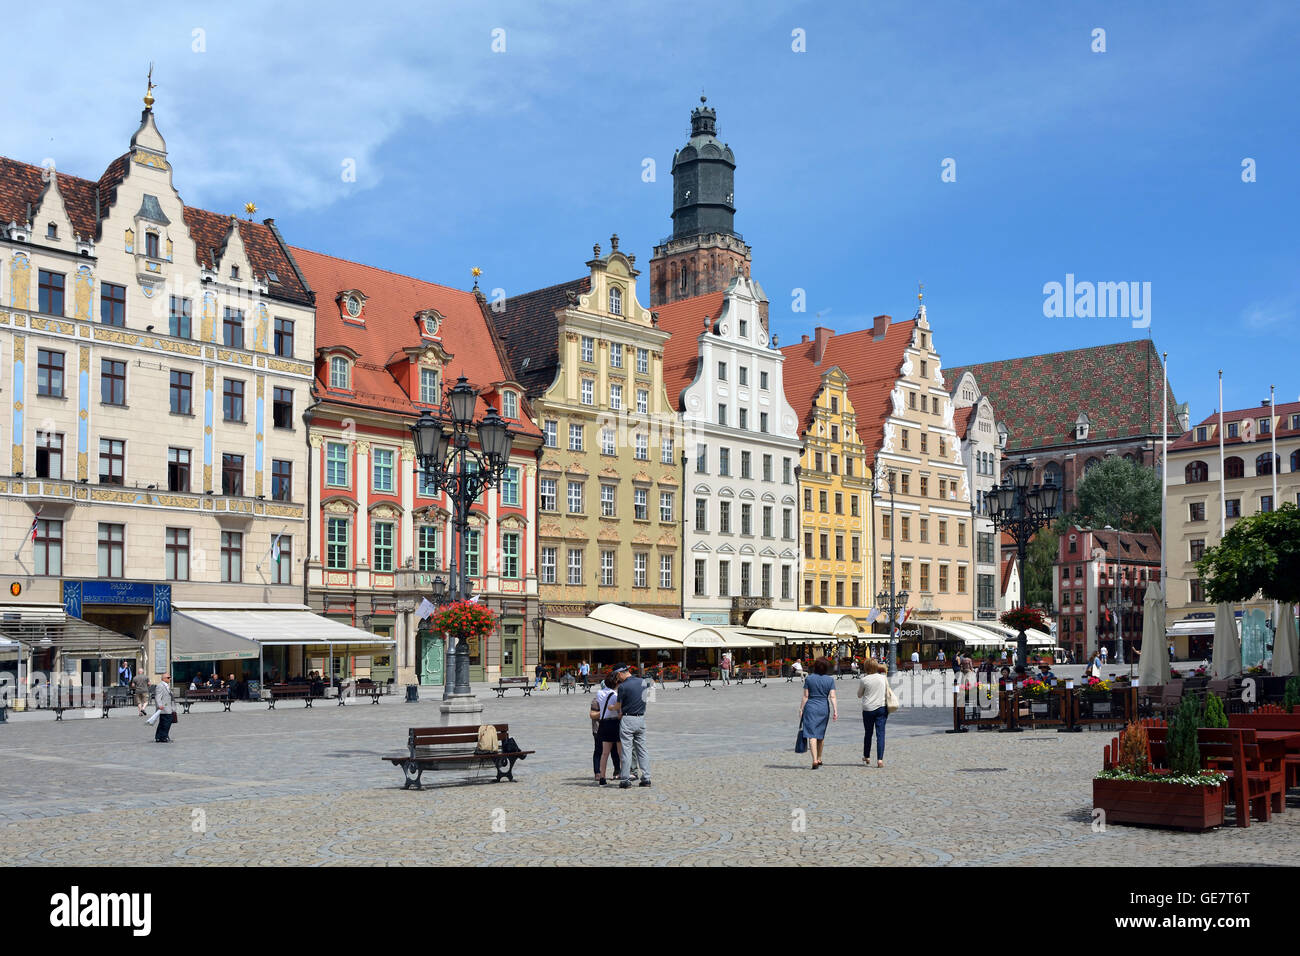 Market Square in the Old Town of Wroclaw - Poland. Stock Photo